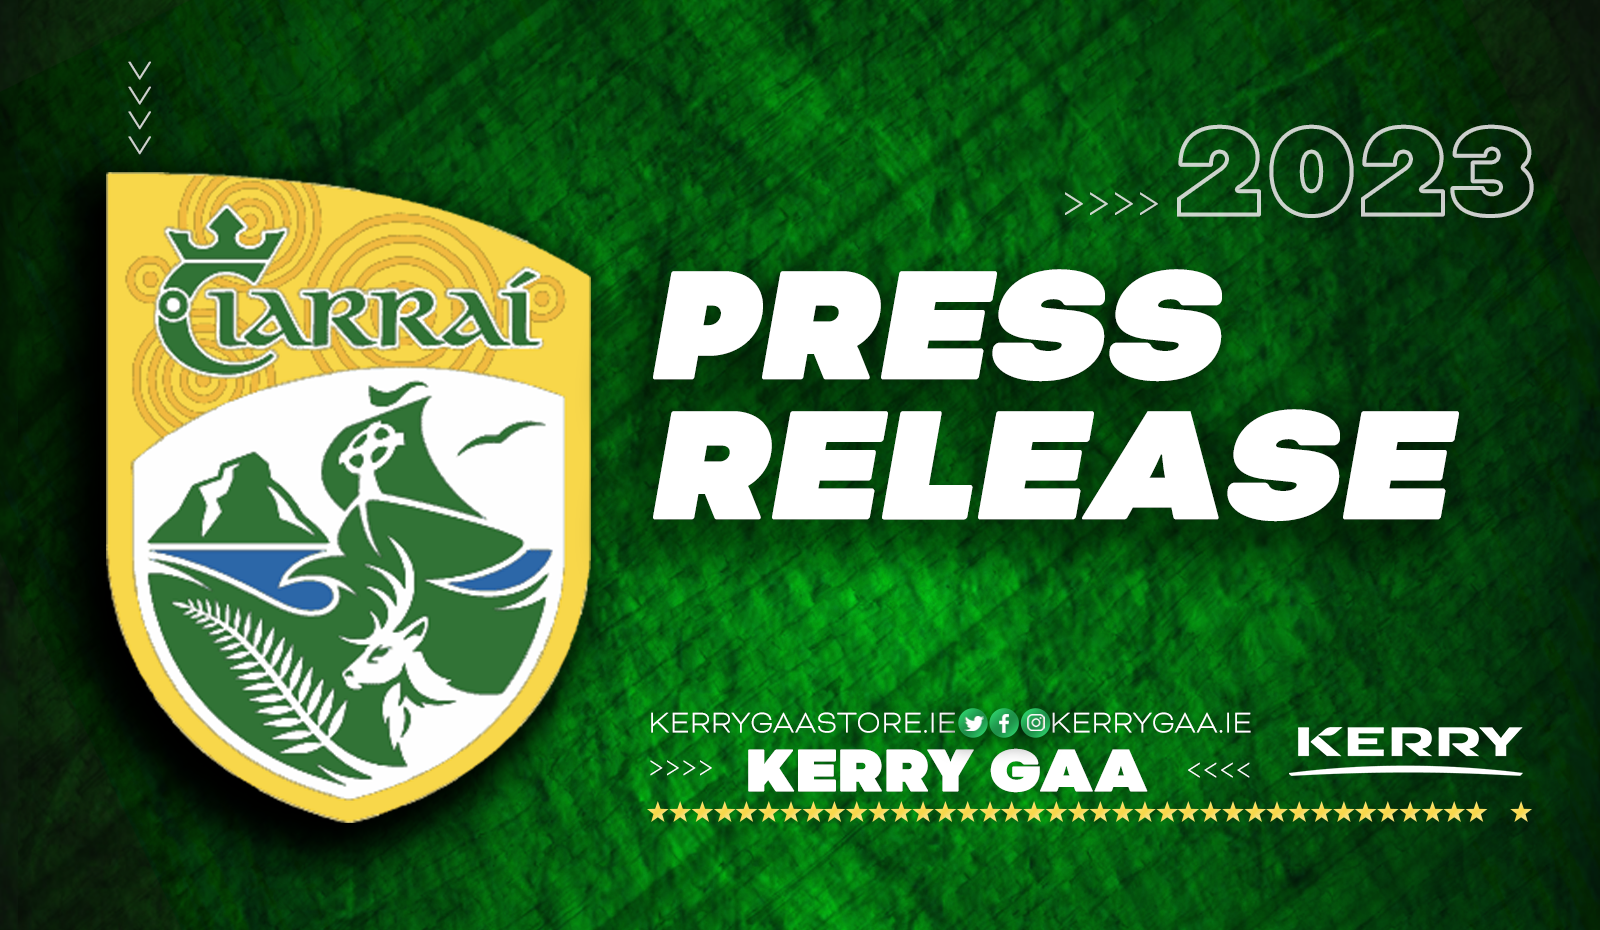 The Pride of Kerry